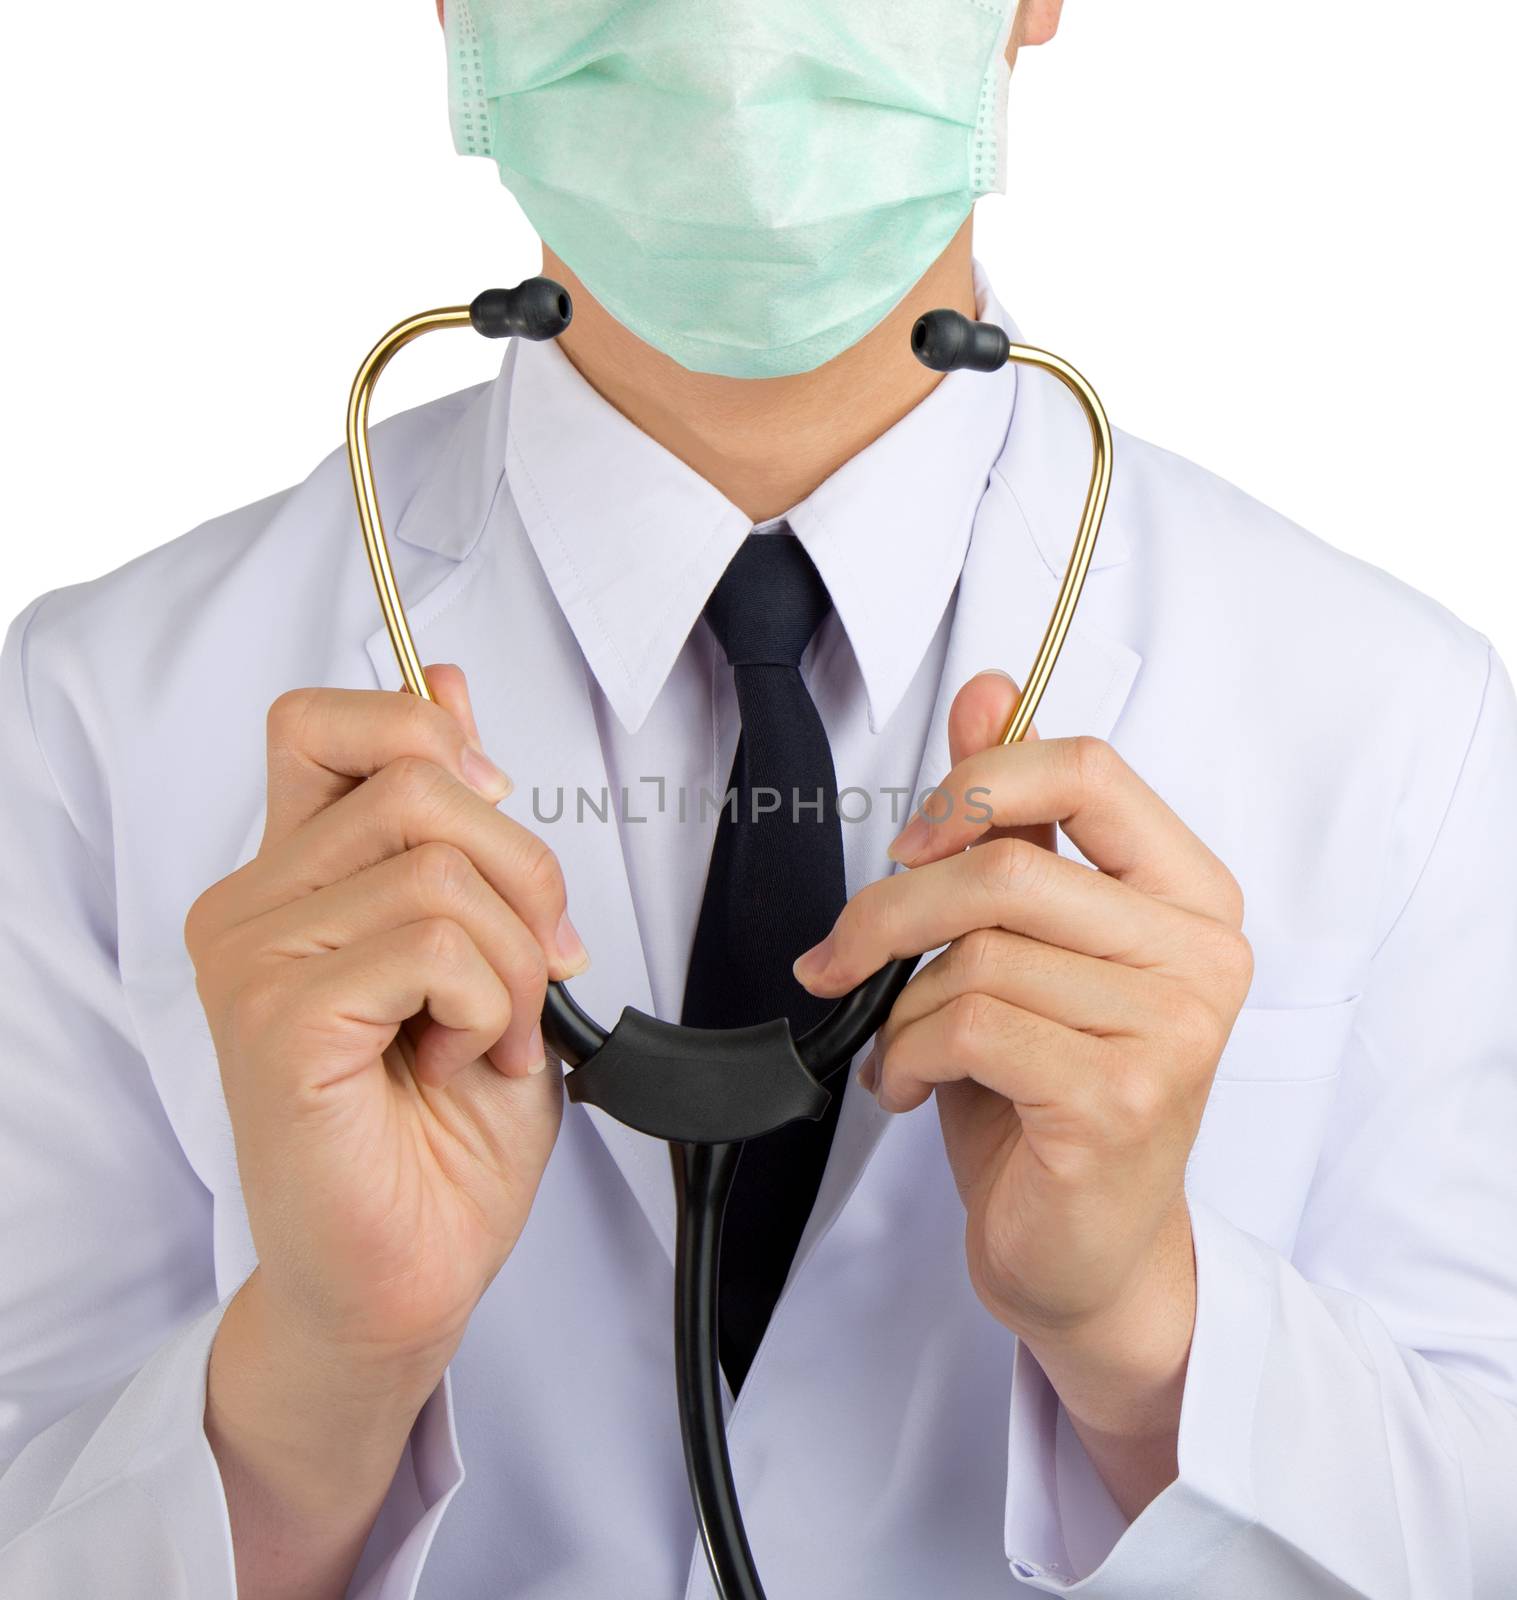 Well dressed man doctor cover stethoscope prepare inspect patient adjusting white background : fill text